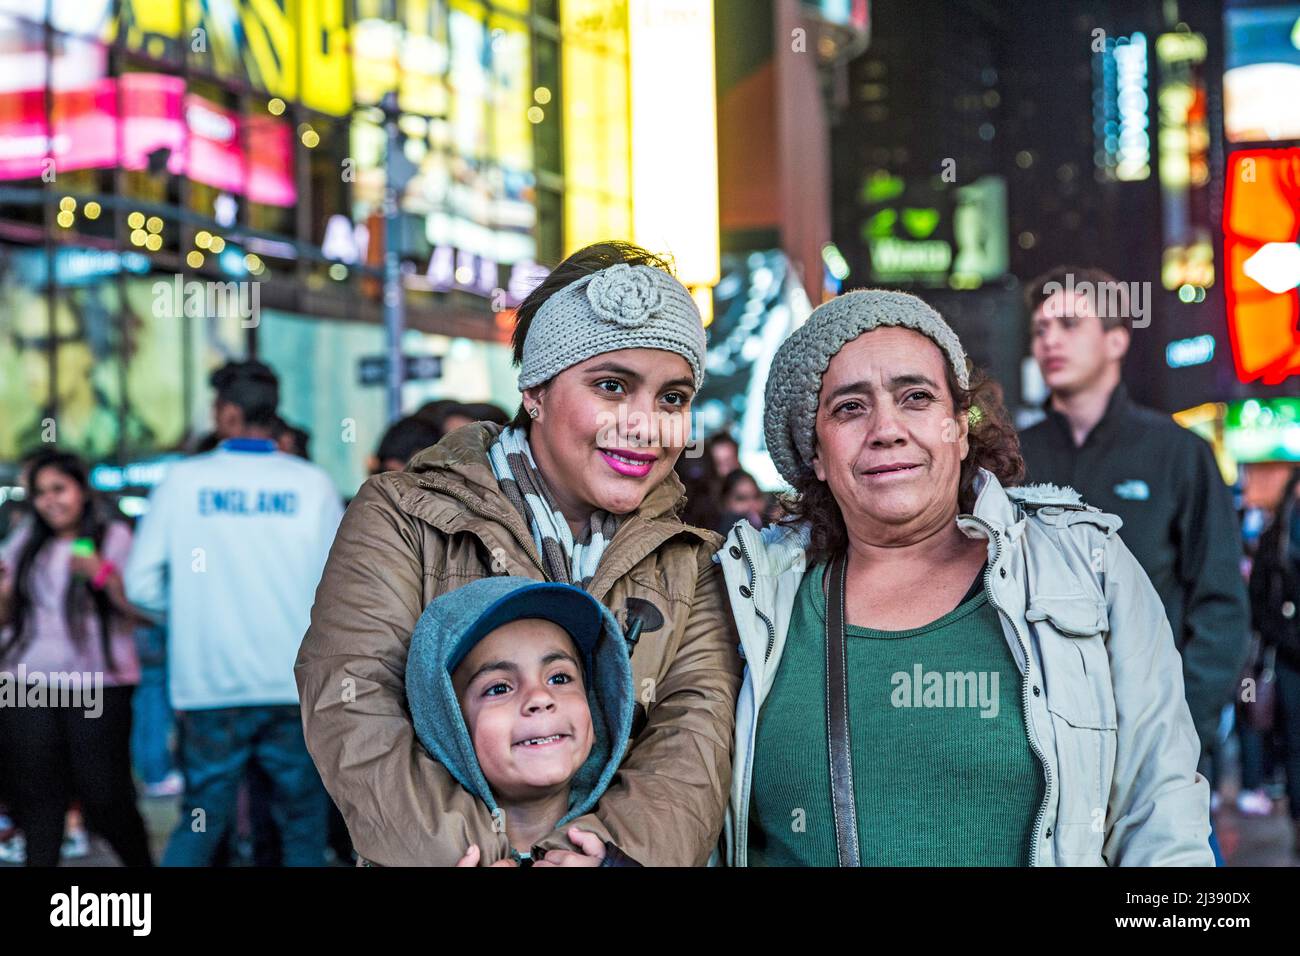 NEW YORK, USA - OCT 25, 2015: tourists have a photograph as souvenir at times square by night. The place is even crowded by night by tourists. Stock Photo